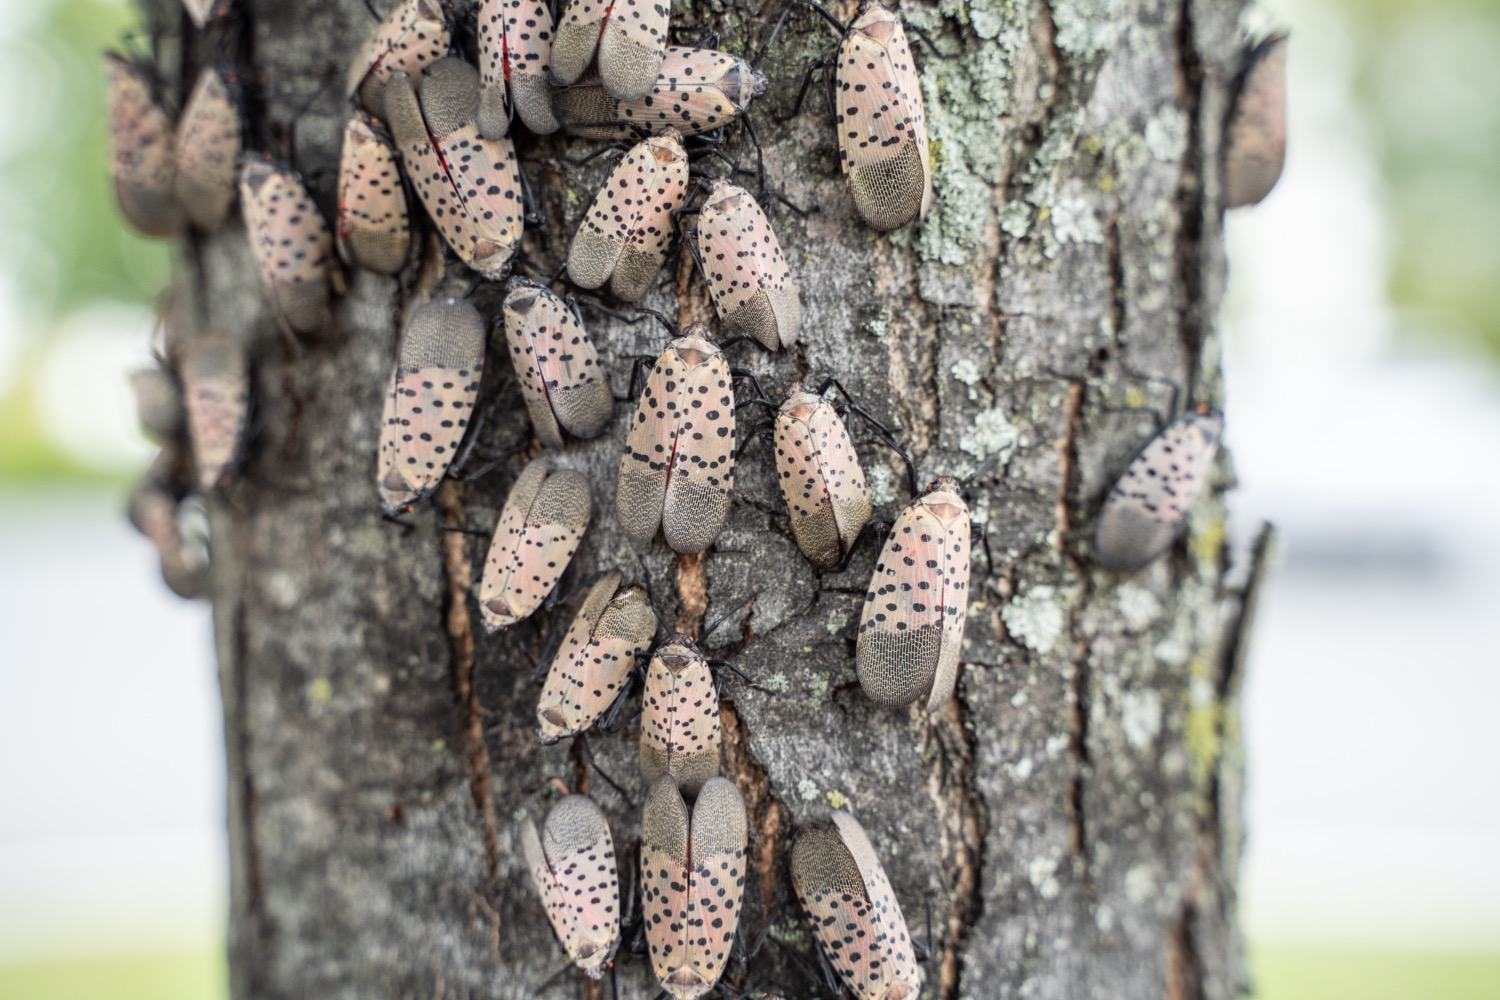 over a dozen spotted lanternflies, soft brown dotted with black spots, huddle on a tree trunk